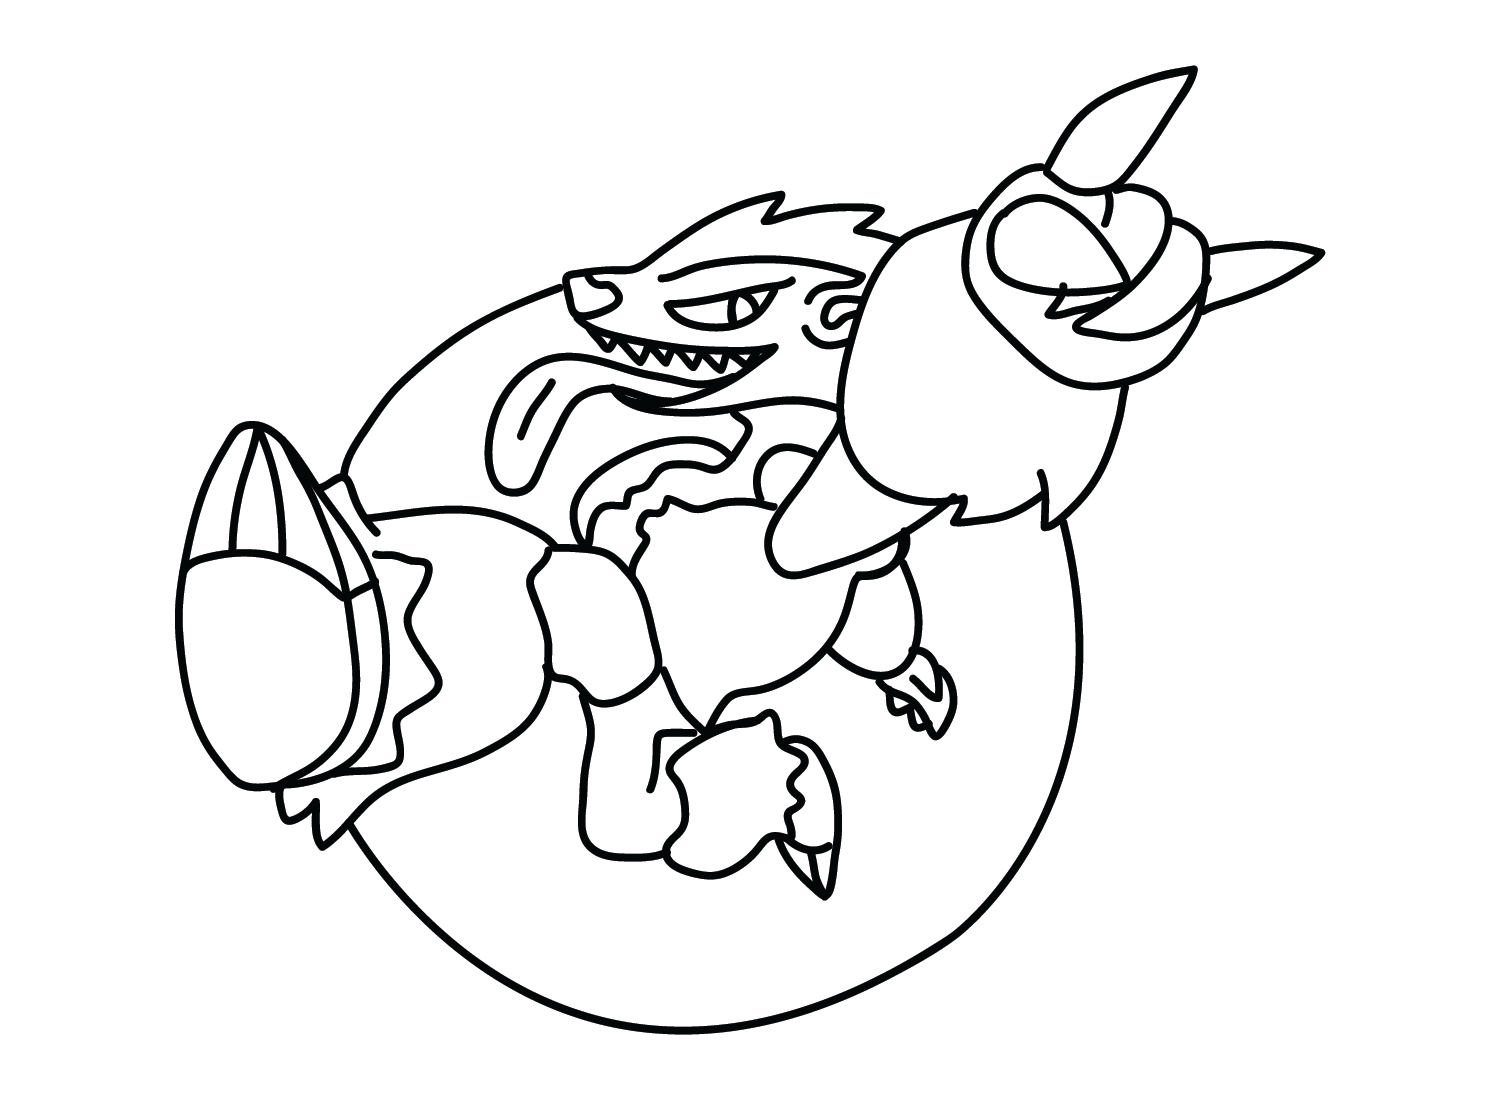 Pokemon Obstagoon Coloring Page